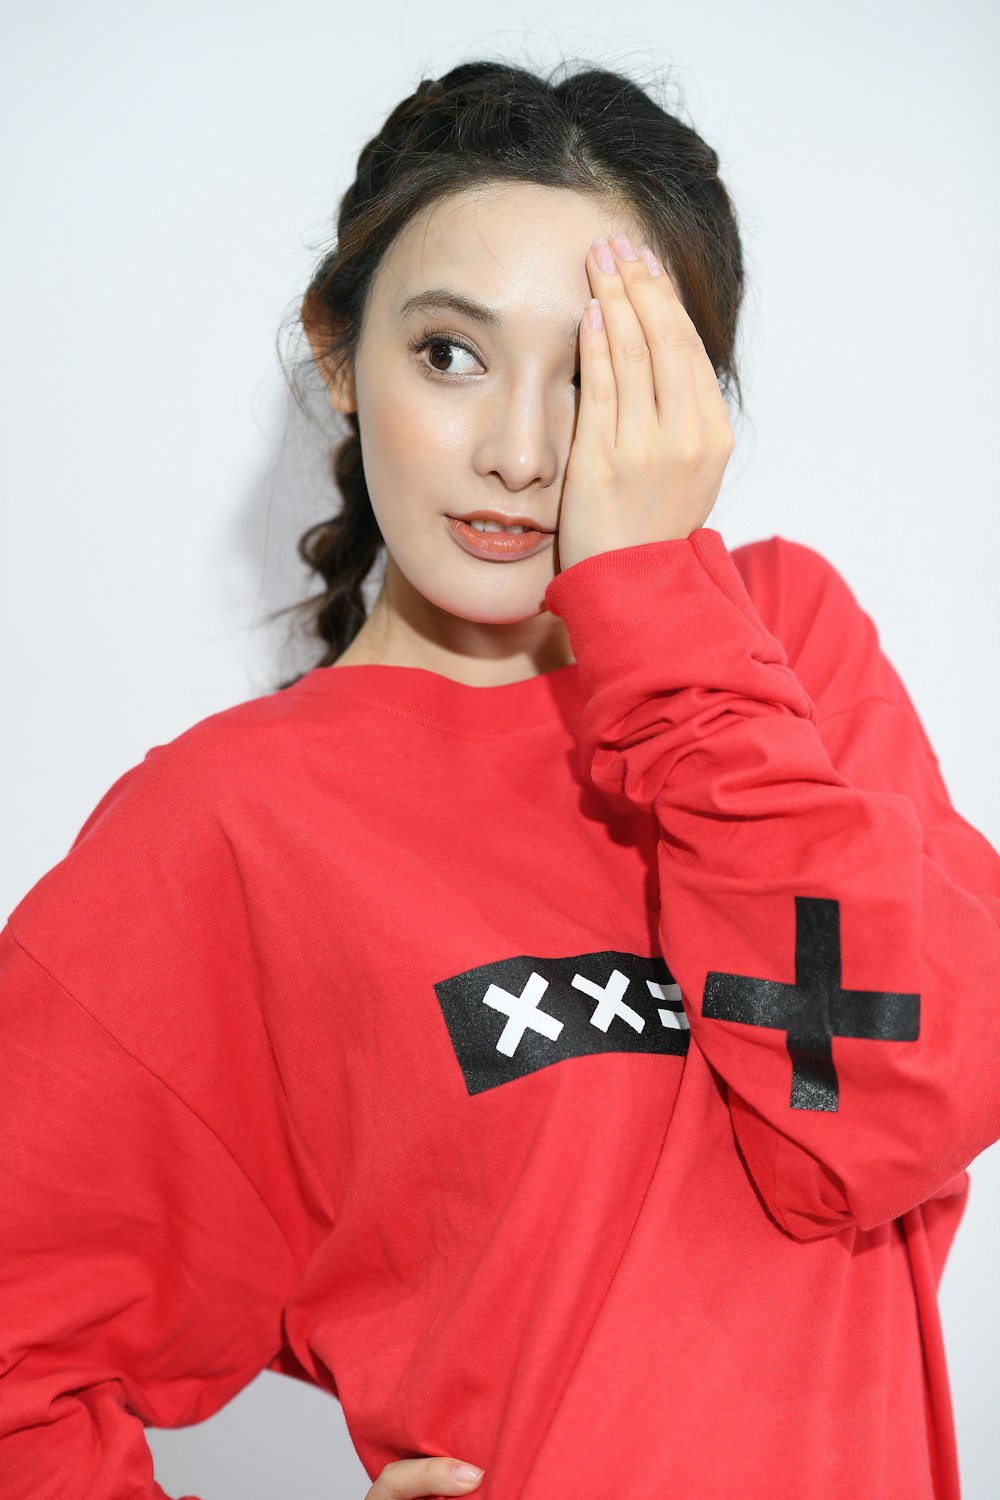 woman in red and black crew-neck sweater covering her left eye using her left hand